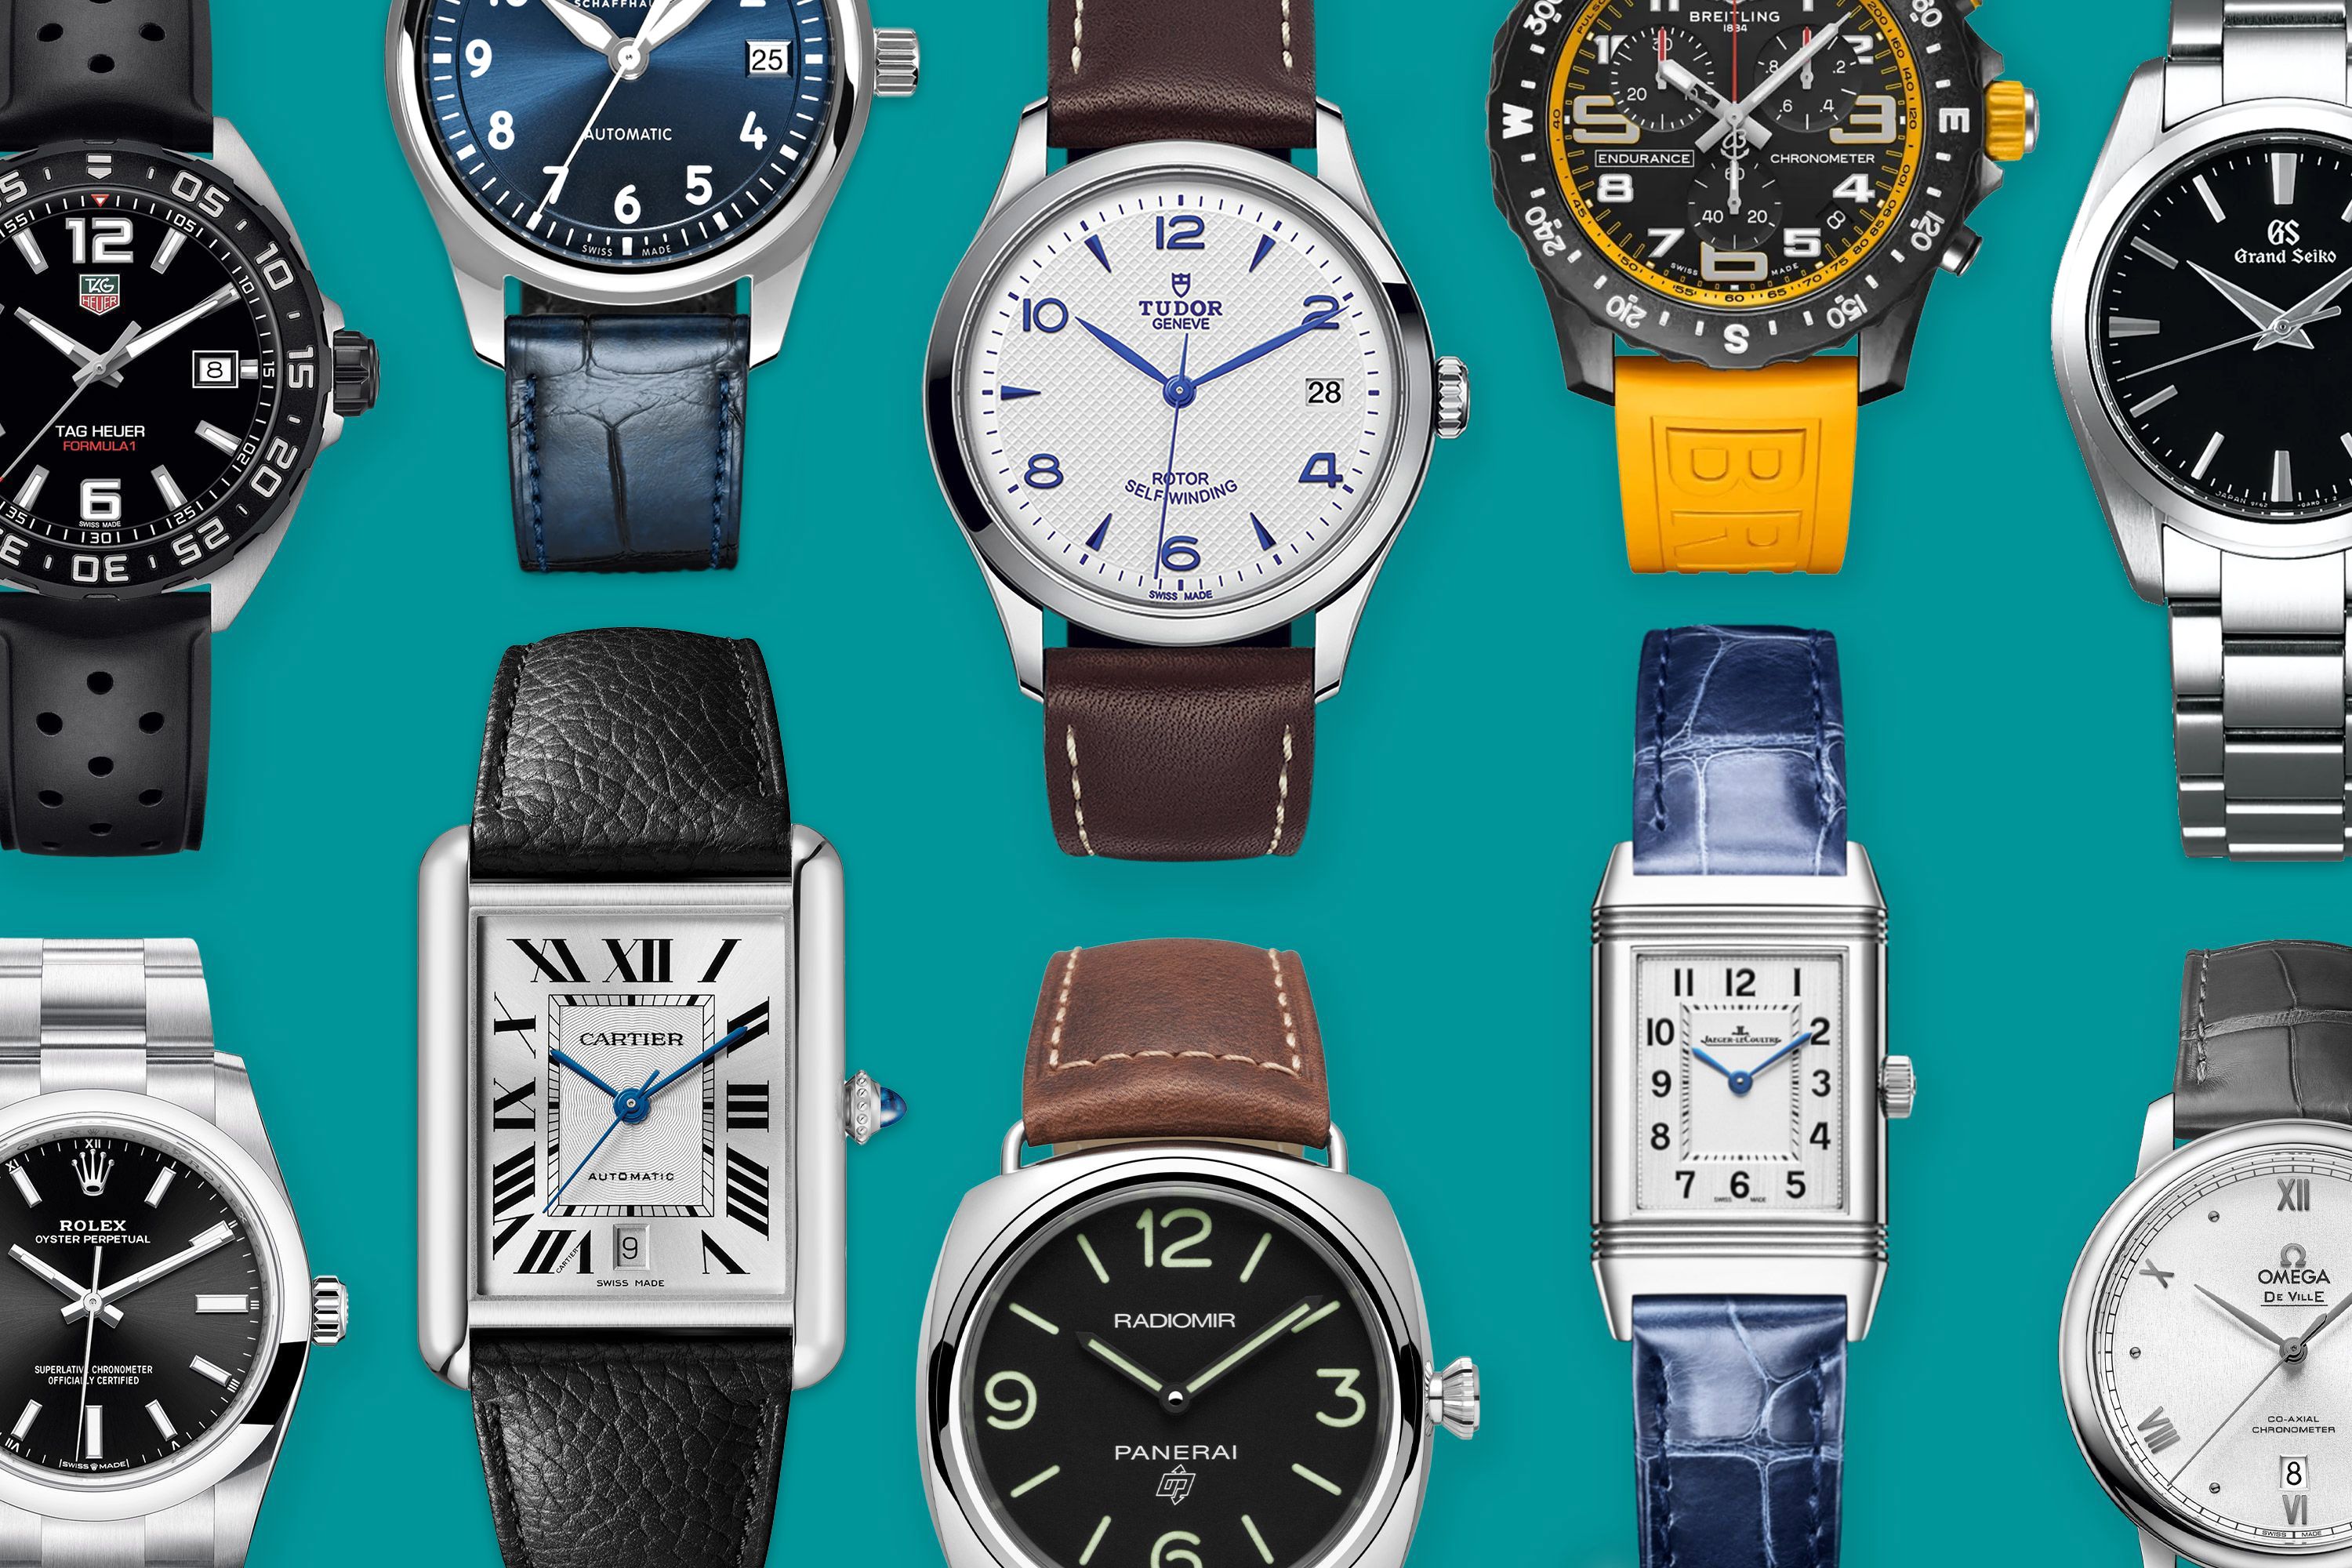 operatie Marine Tulpen These Are the Entry-Level Watches From 10 Great Luxury Watch Brands